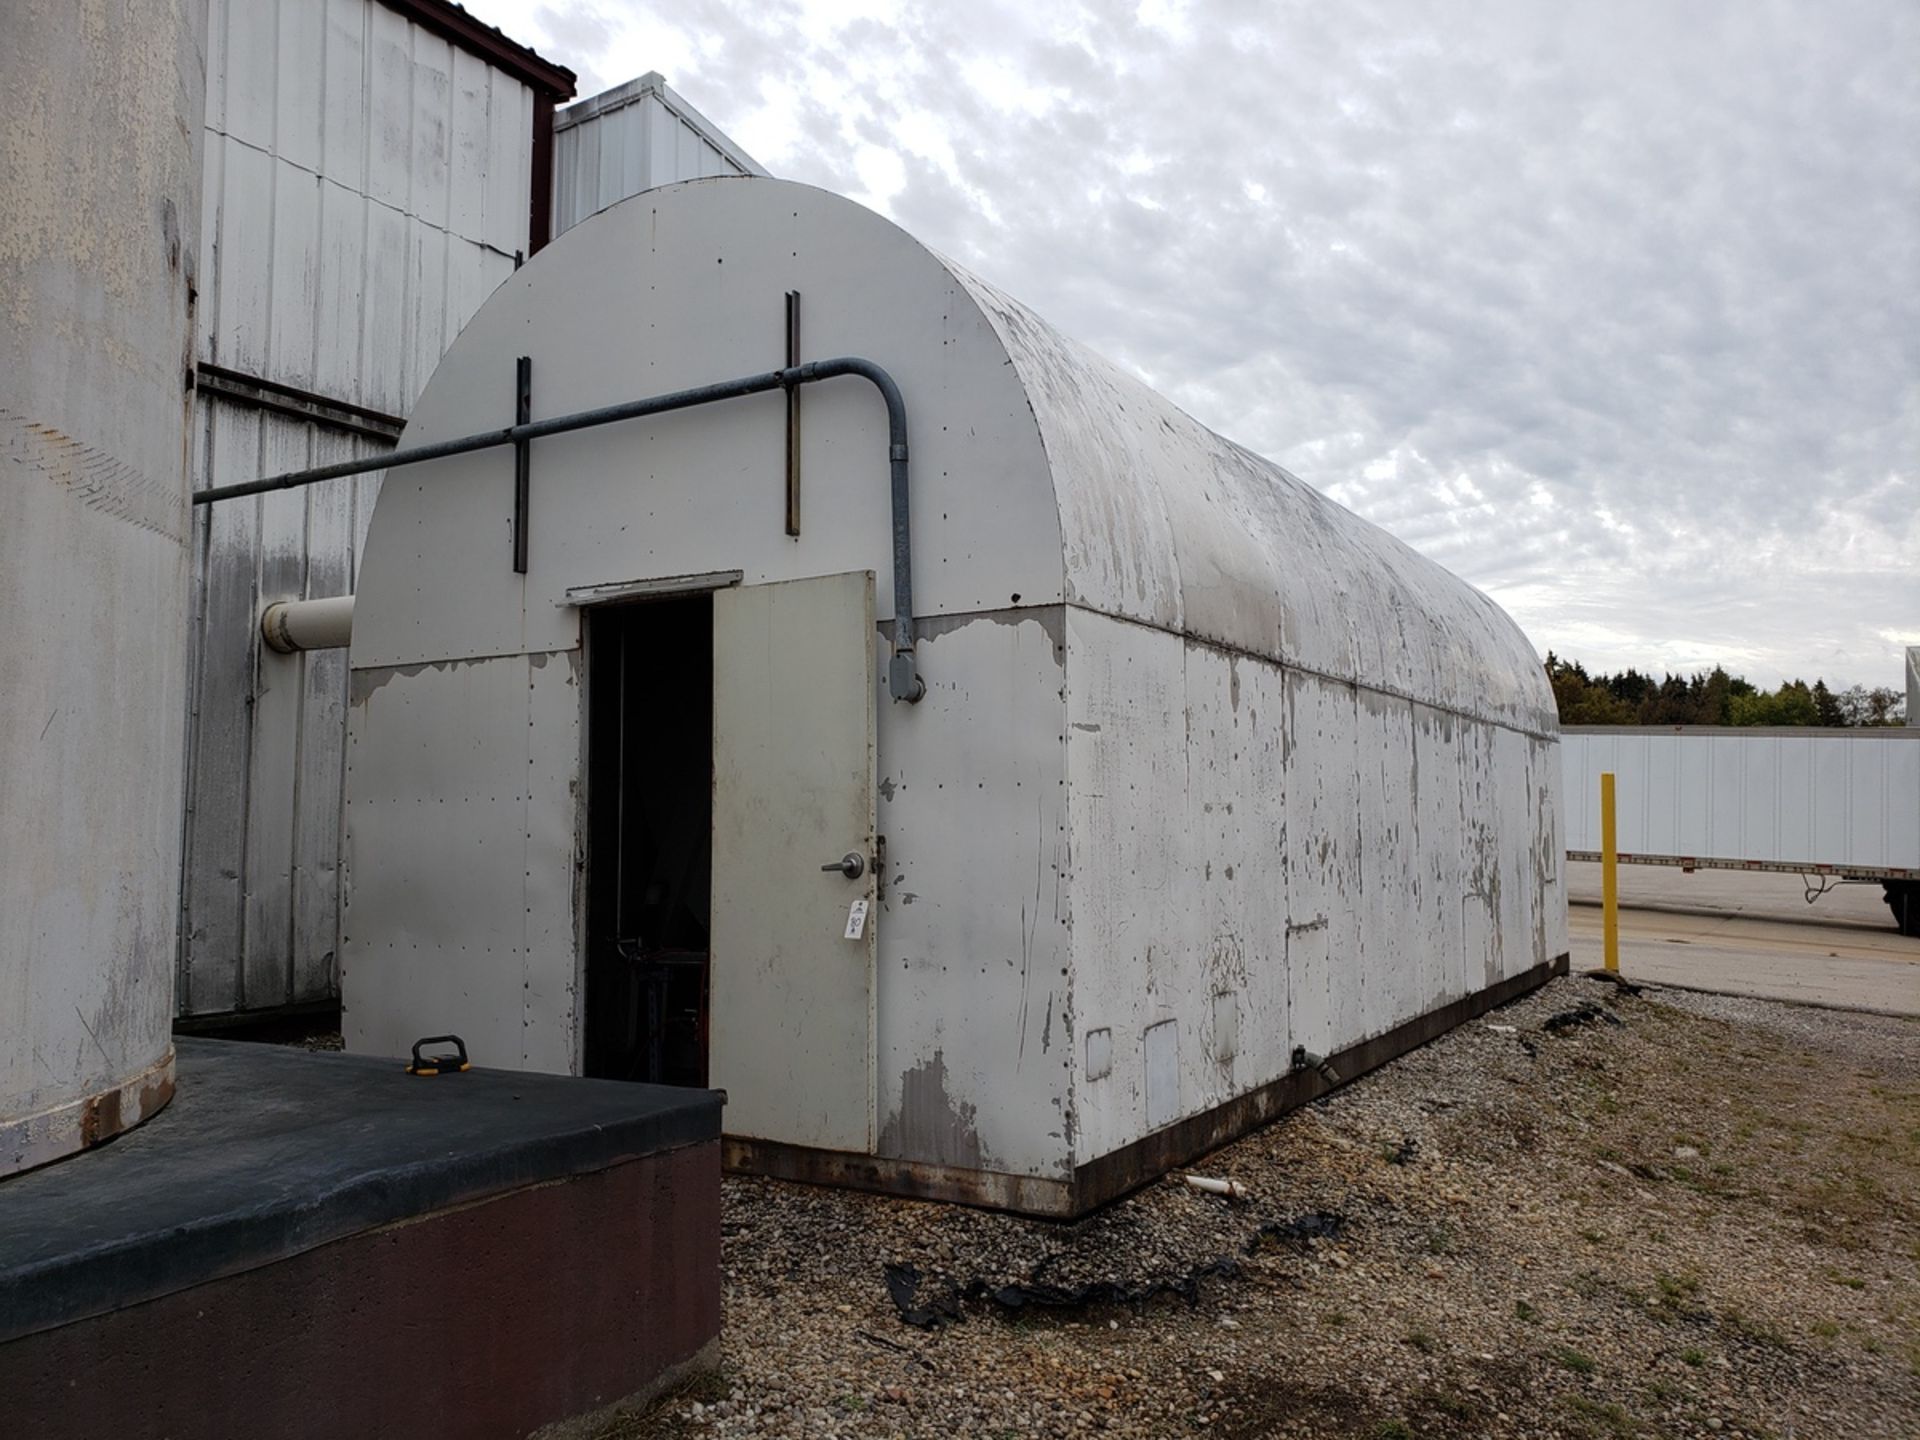 20,000 Gallon Horizontal Stainless Steel Storage Tank, W/ Pumps & Strainers | Rig Fee: $3500